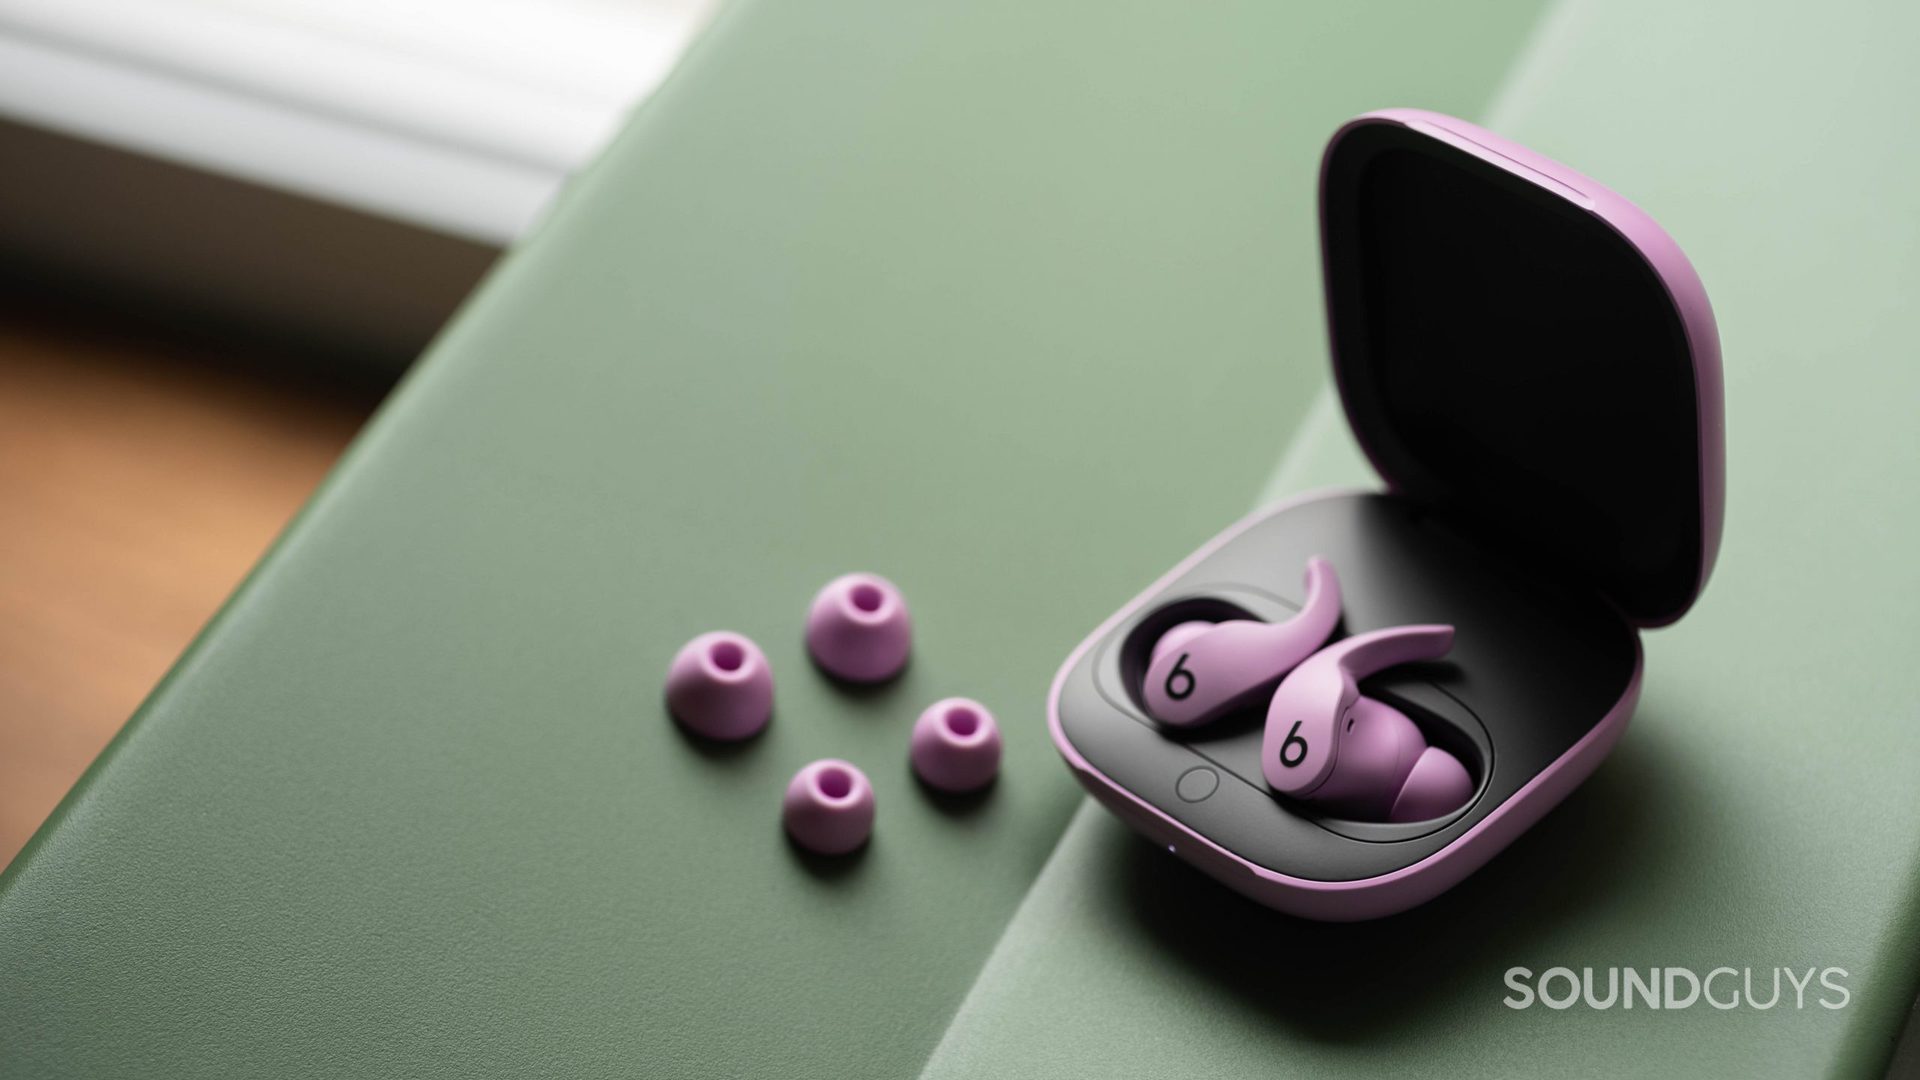 The noise canceling Beats Fit Pro true wireless earbuds inside the case, while showing different ear tip sizes.